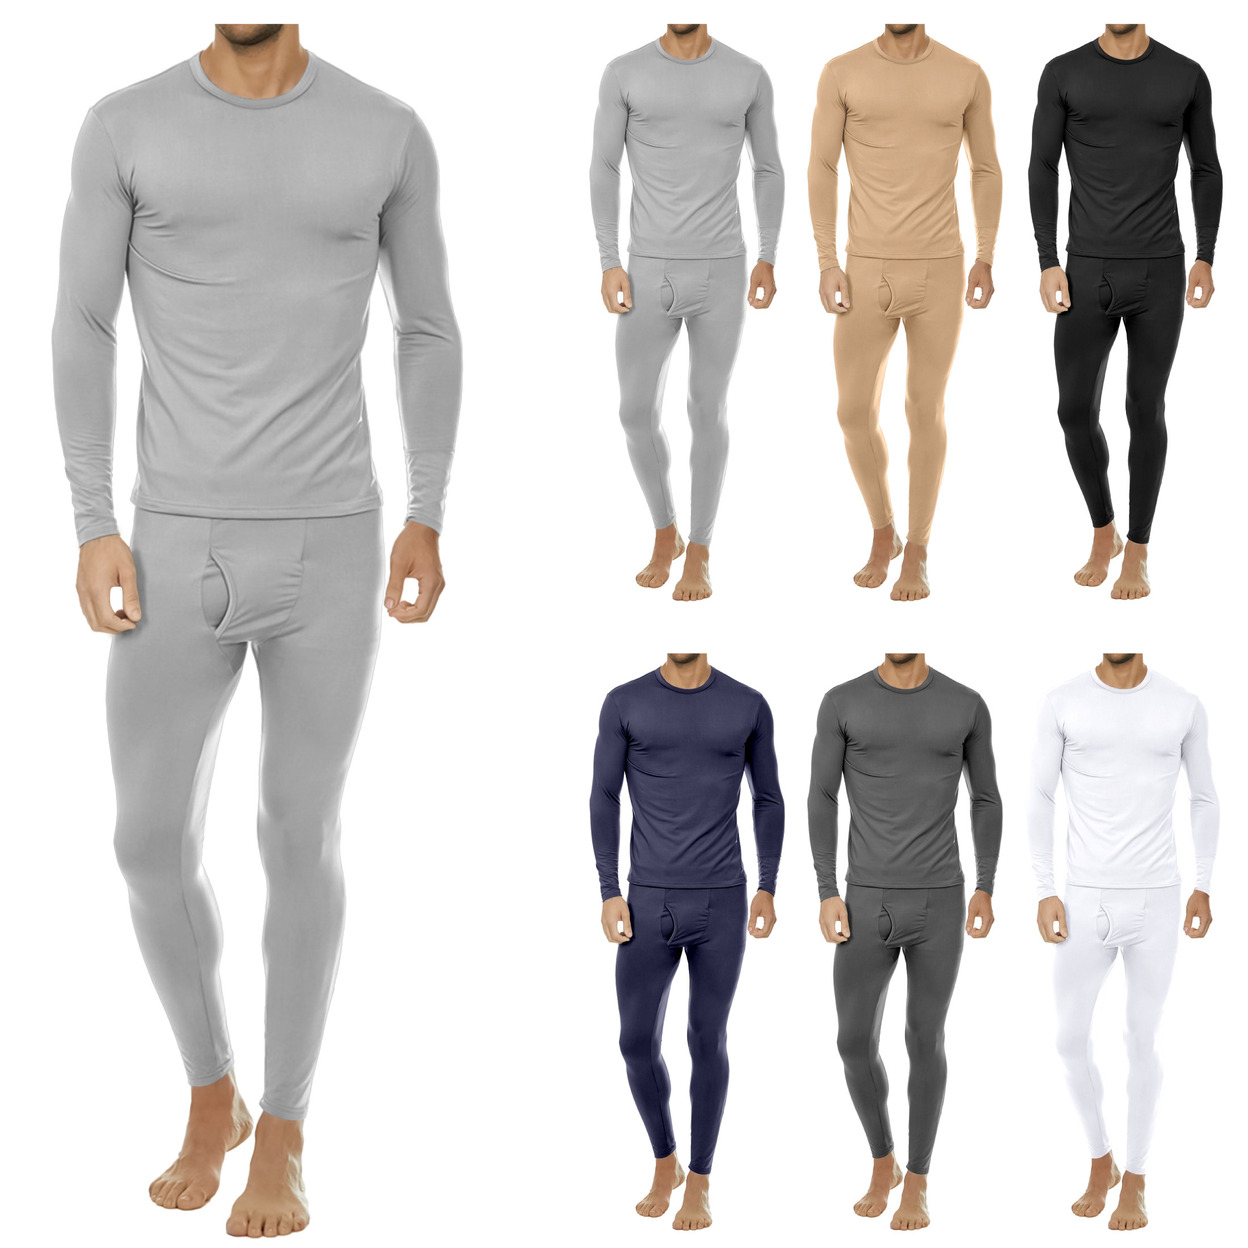 2-Sets: Men's Winter Warm Fleece Lined Thermal Underwear Set For Cold Weather - White&navy, Medium